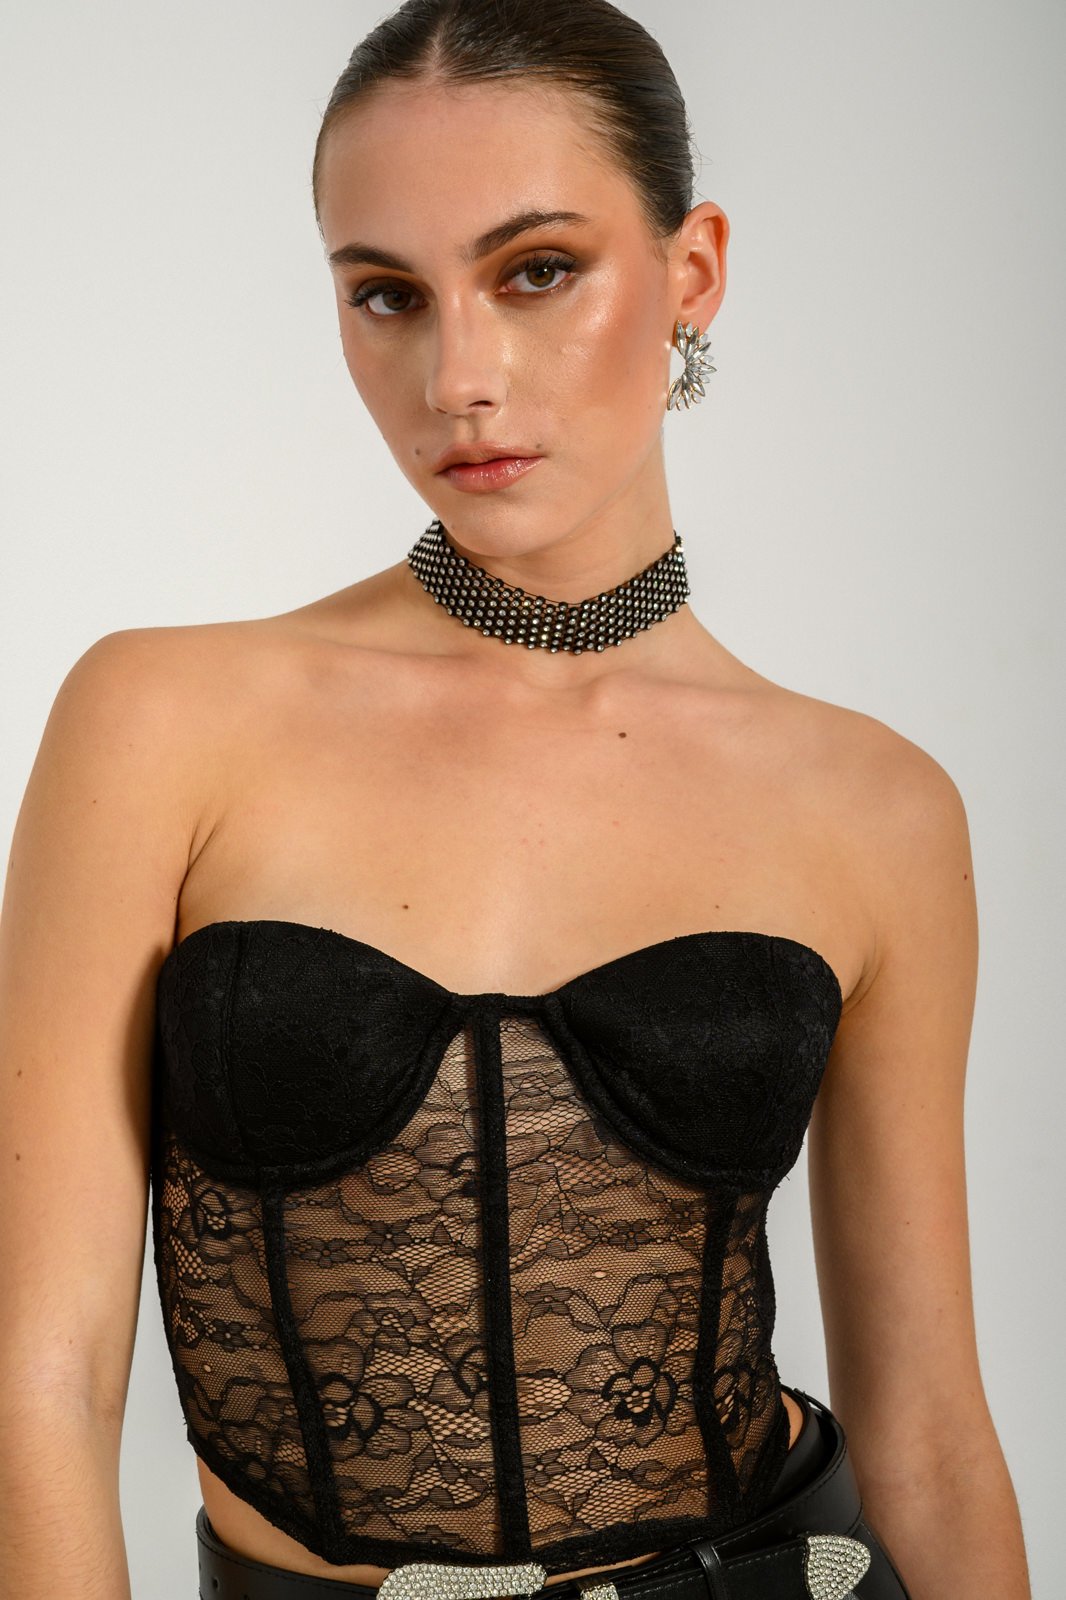 Strapless bustier with lace details